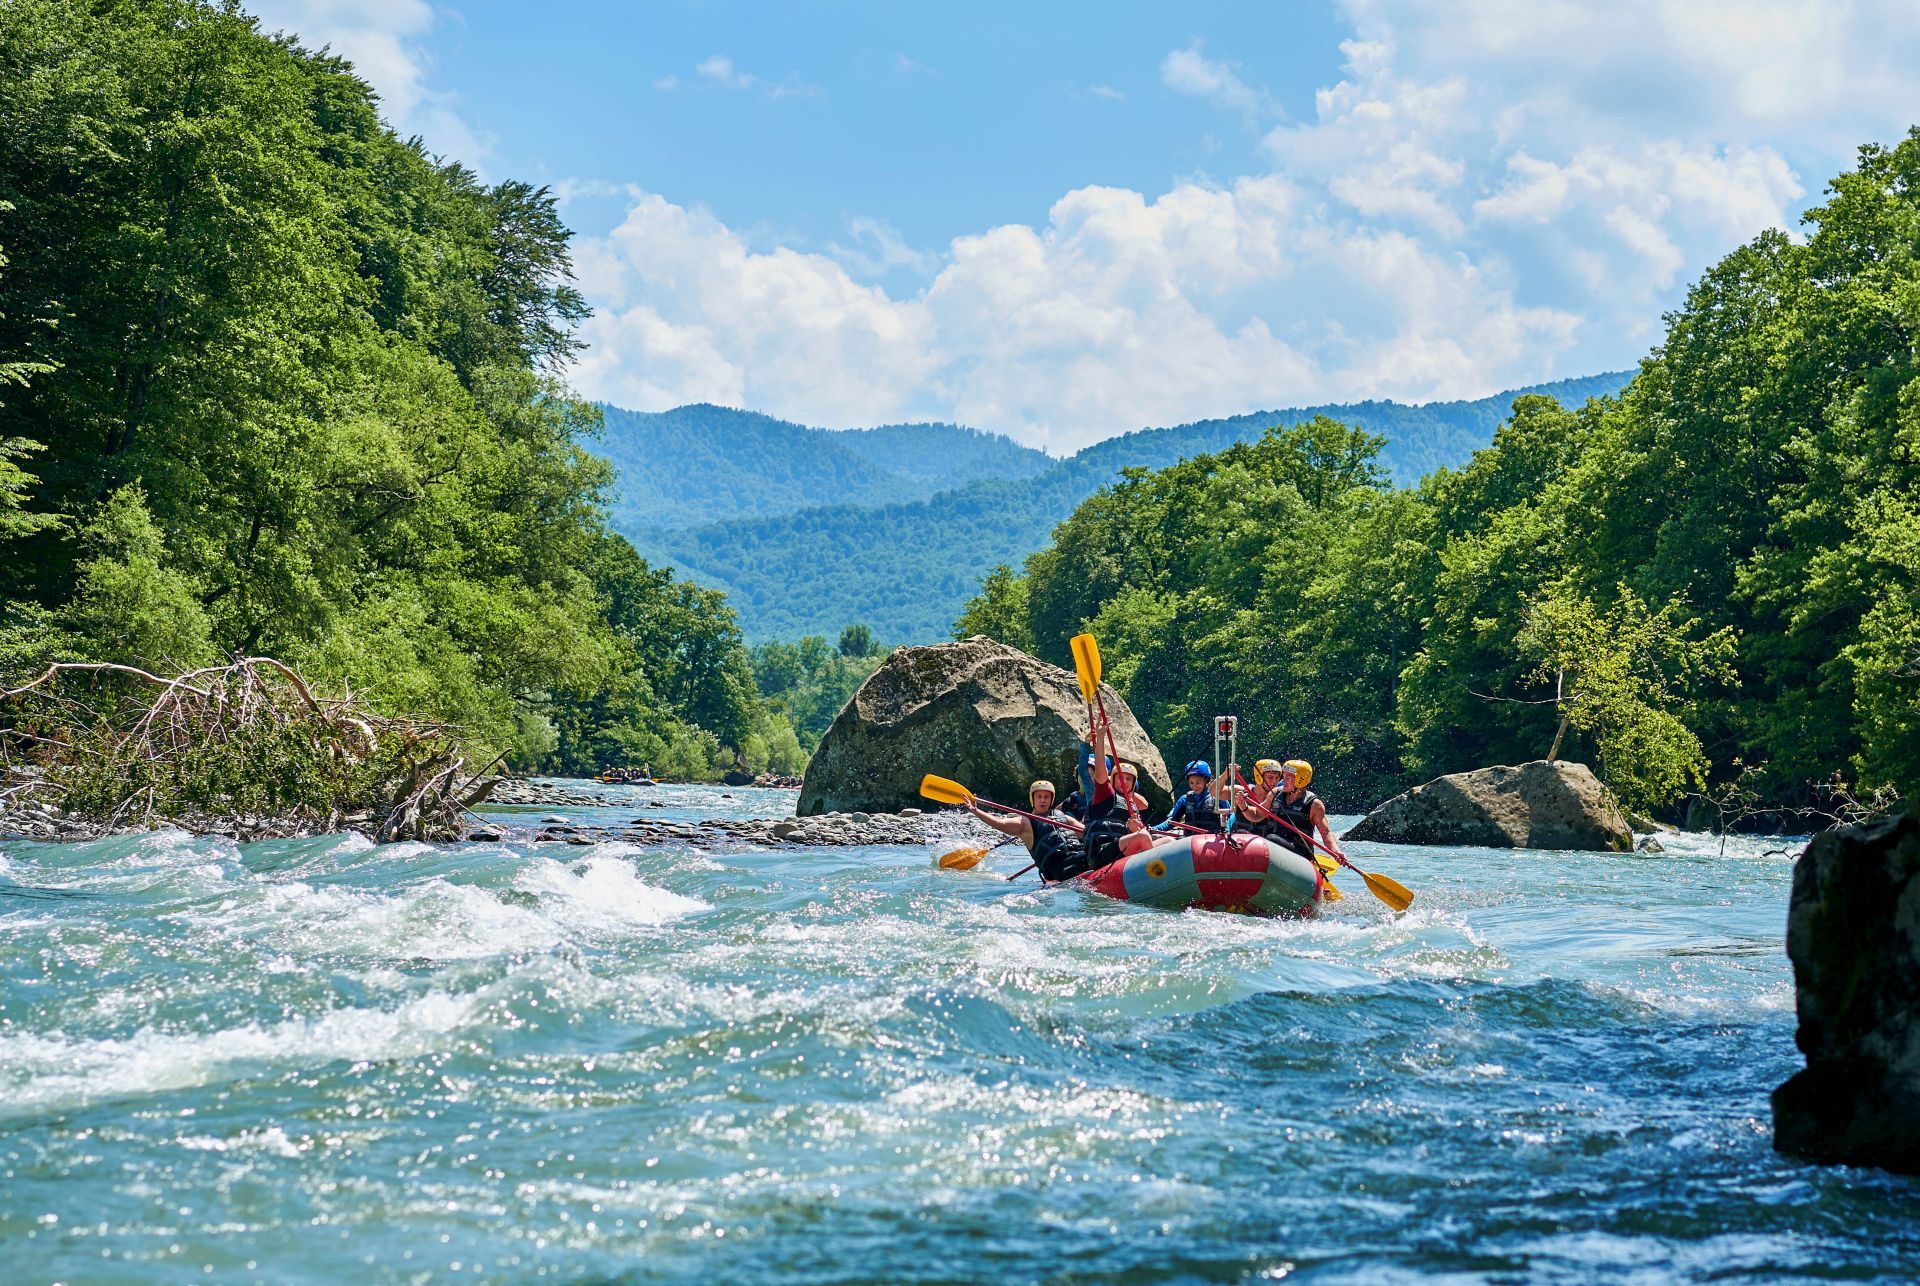 Rafting in the rivers of Greece